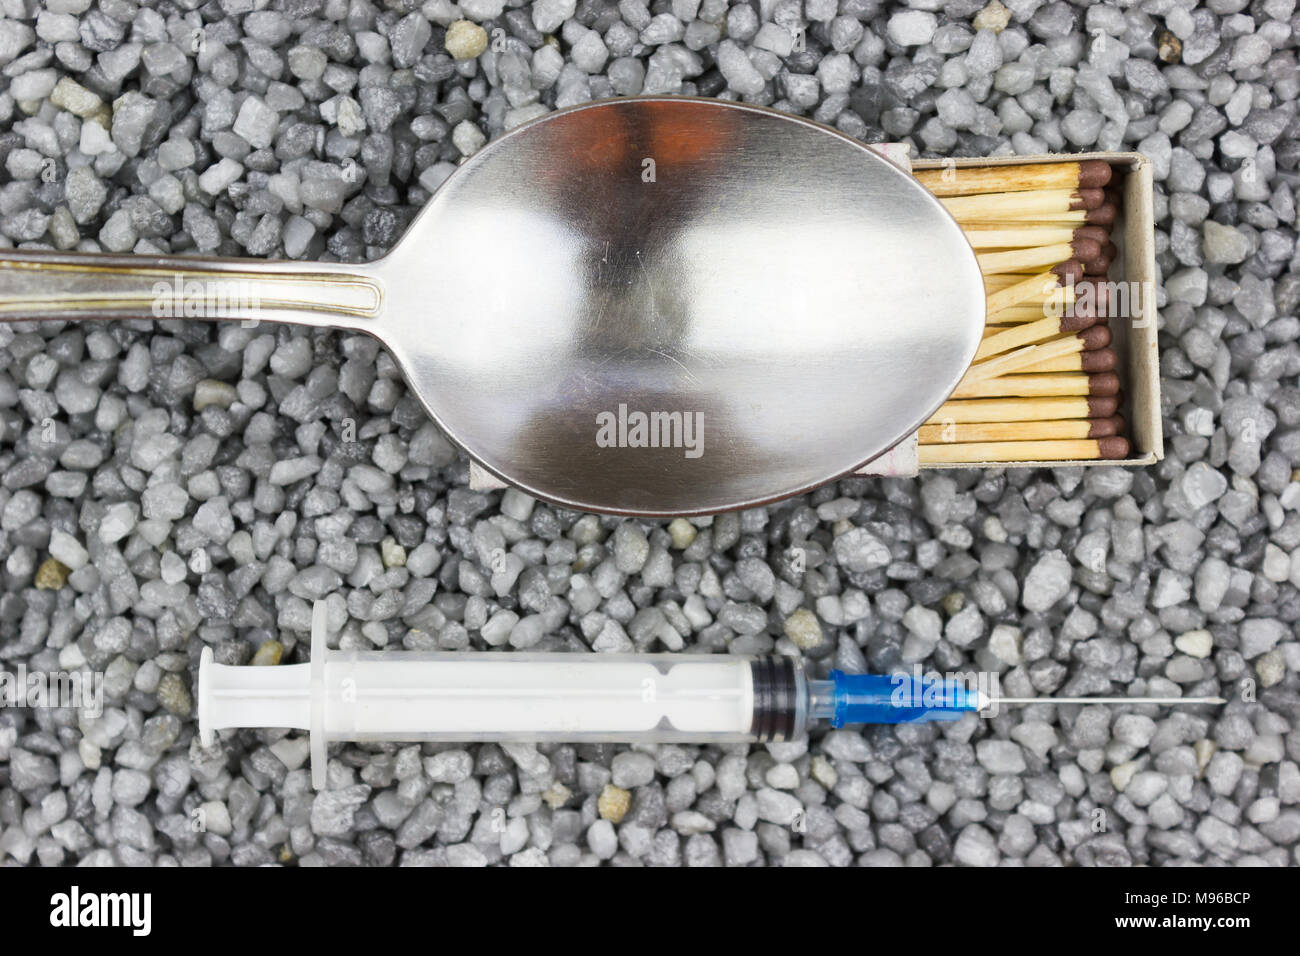 Plastic syringe, a spoon and a match on the fine gravel. Medicine, medicine. Taking drugs. Stock Photo